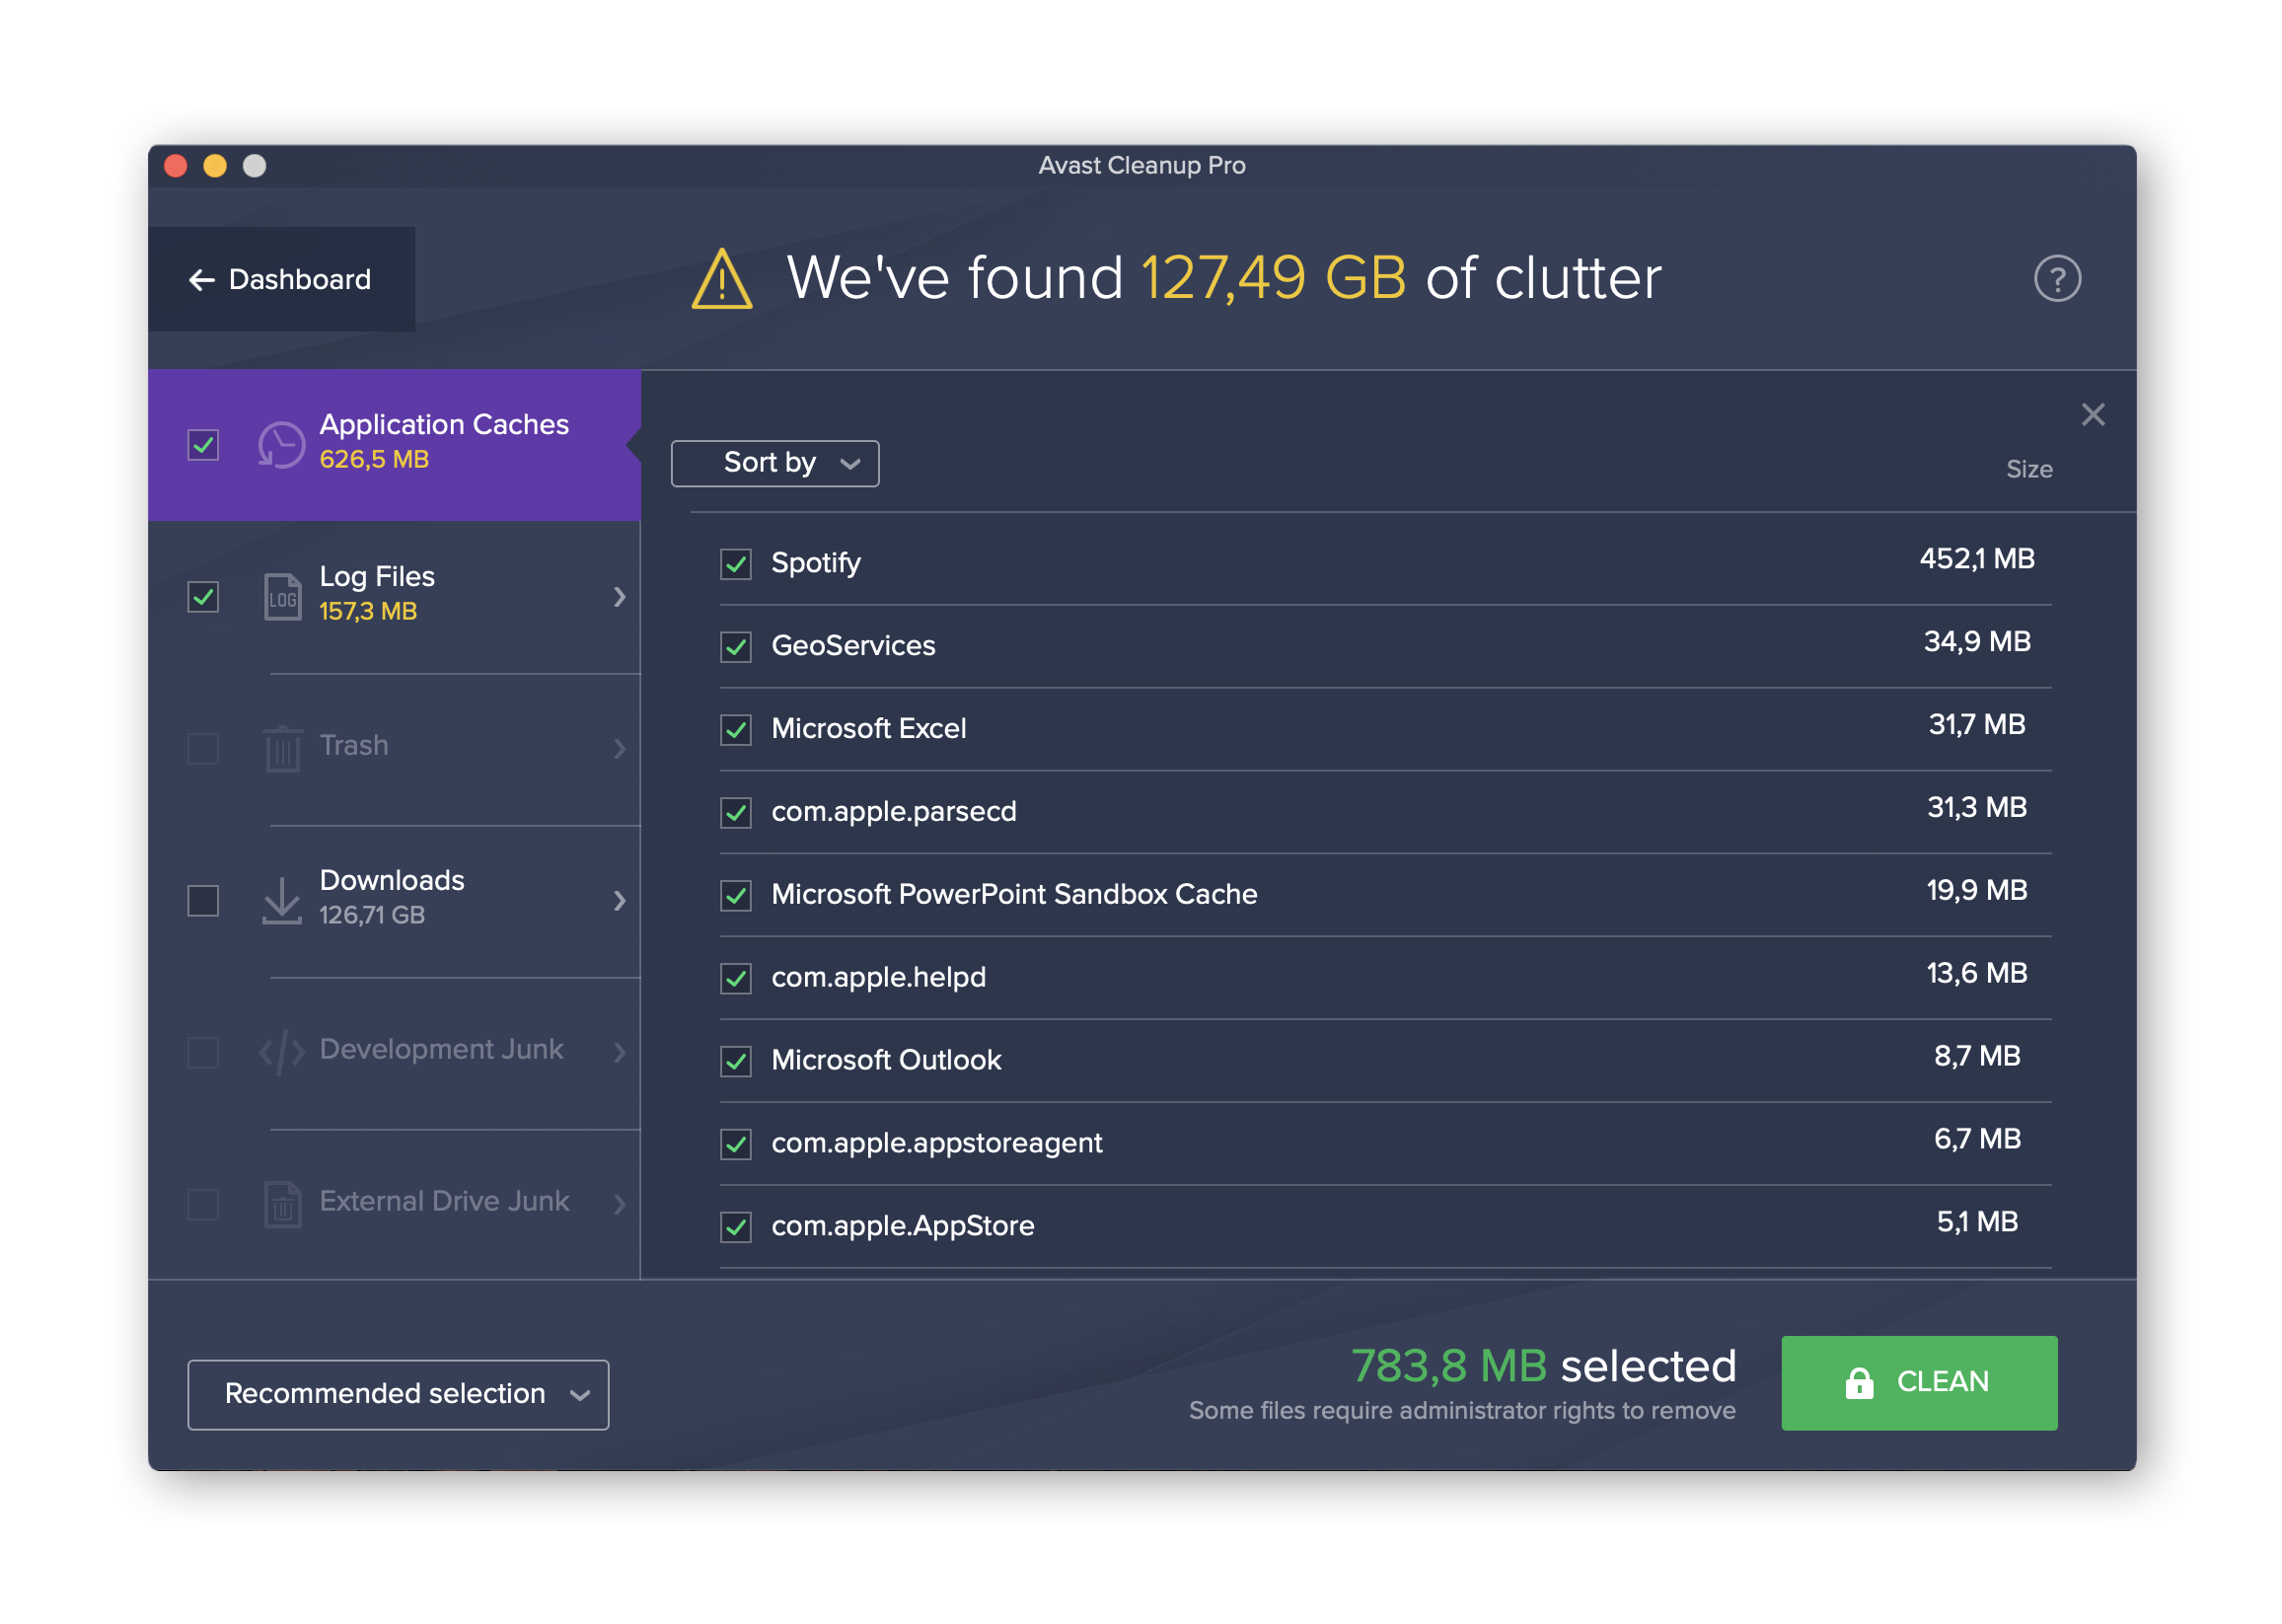 avast cleanup for mac download